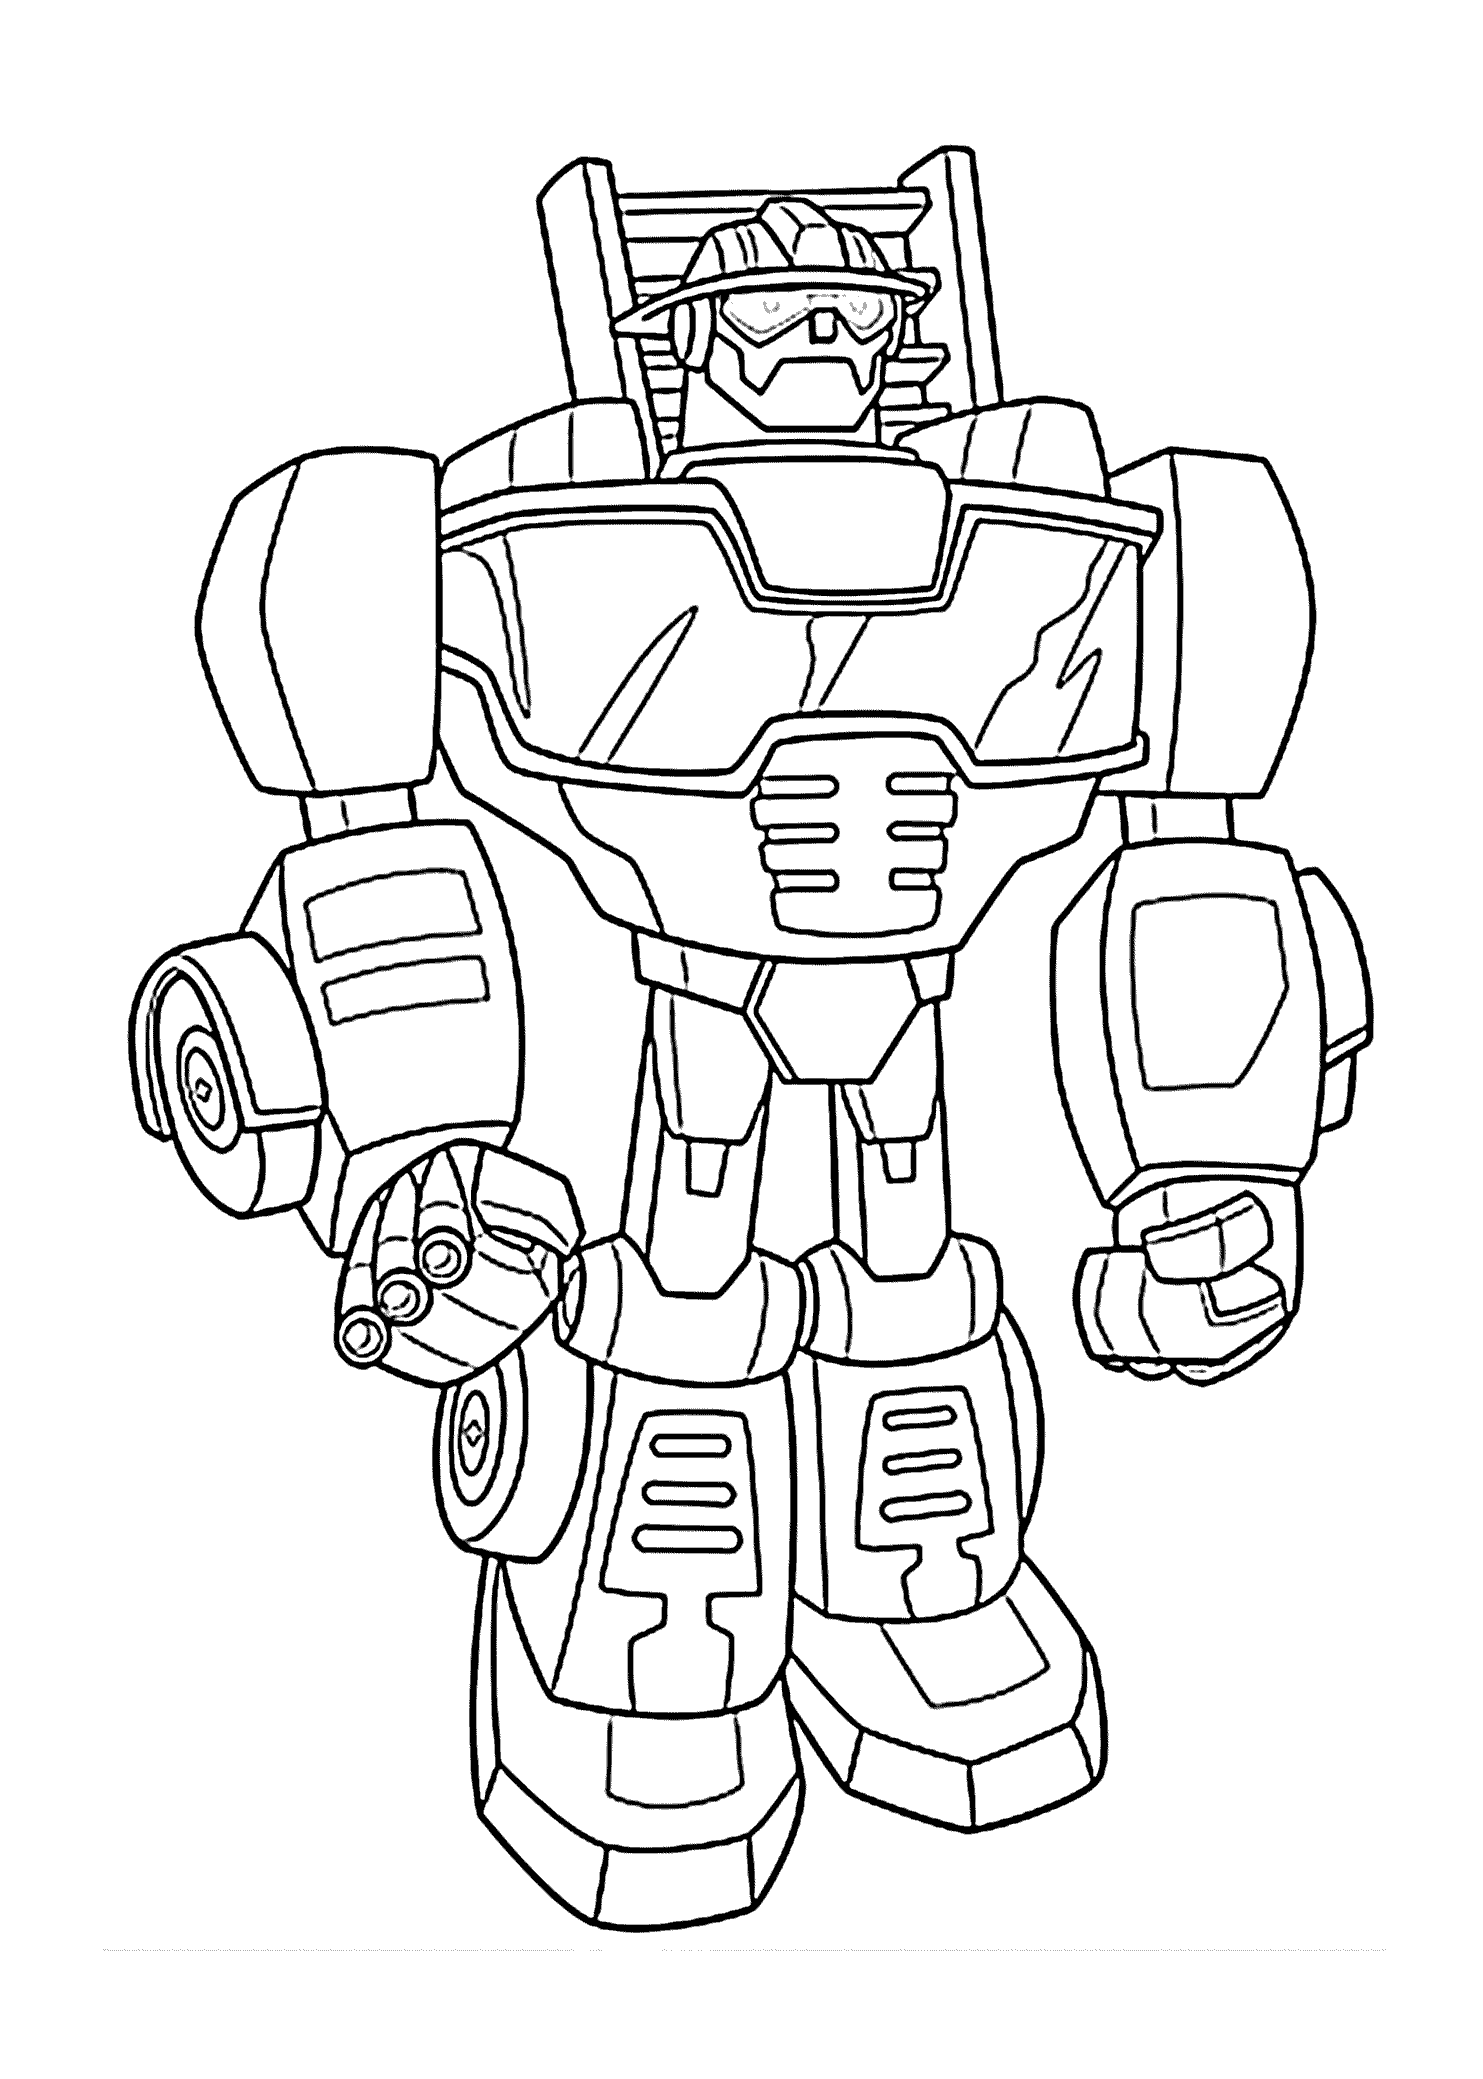 Free Coloring Pages Rescue Bots, Download Free Coloring Pages Rescue